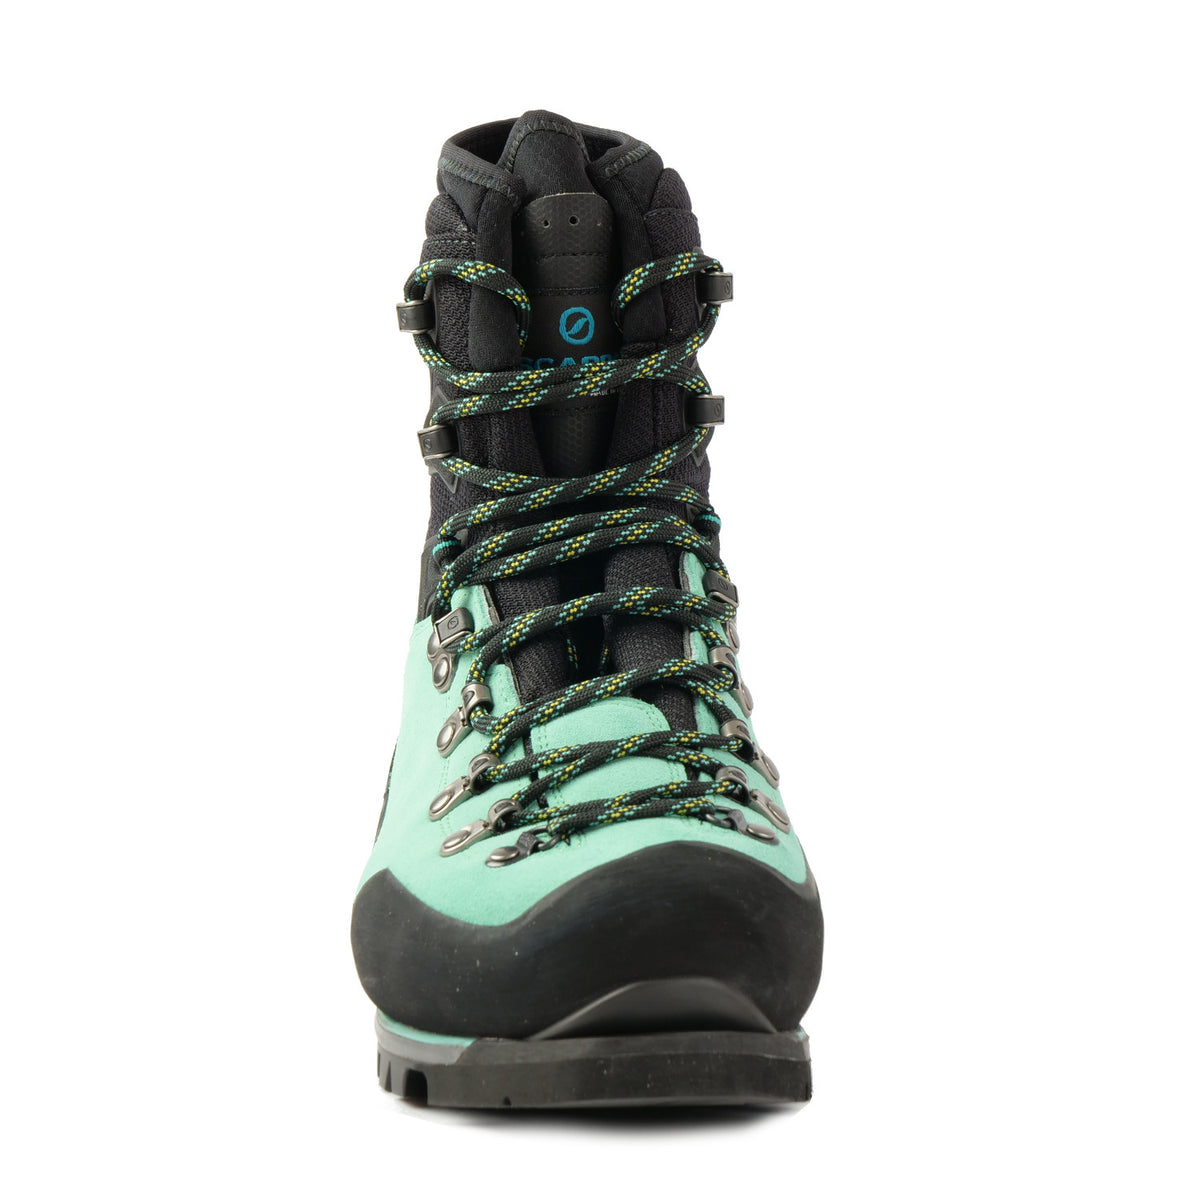 Front view a Scarpa Mont Blanc Pro GTX Womens with Mint Green Perwanger outer and black rubber and flexible sock and tongue